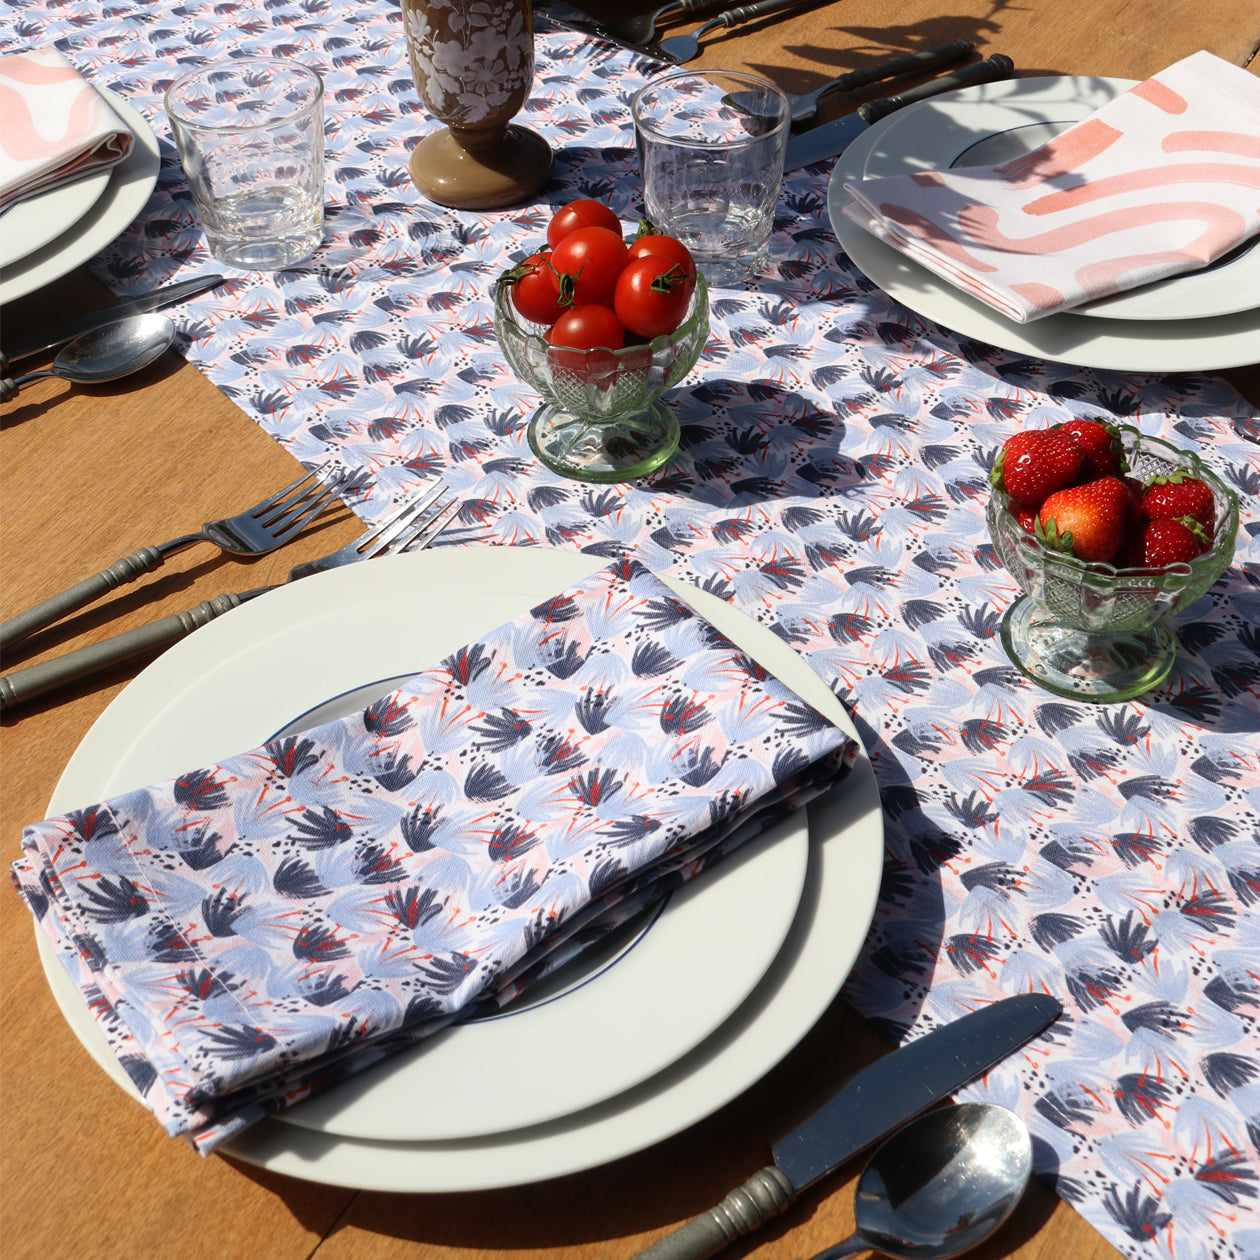 Red and Blue Printed runner close-up with red and blue printed napkin on top of two white plates by silverware in front of cup of strawberries and cup of cherry tomatoes 